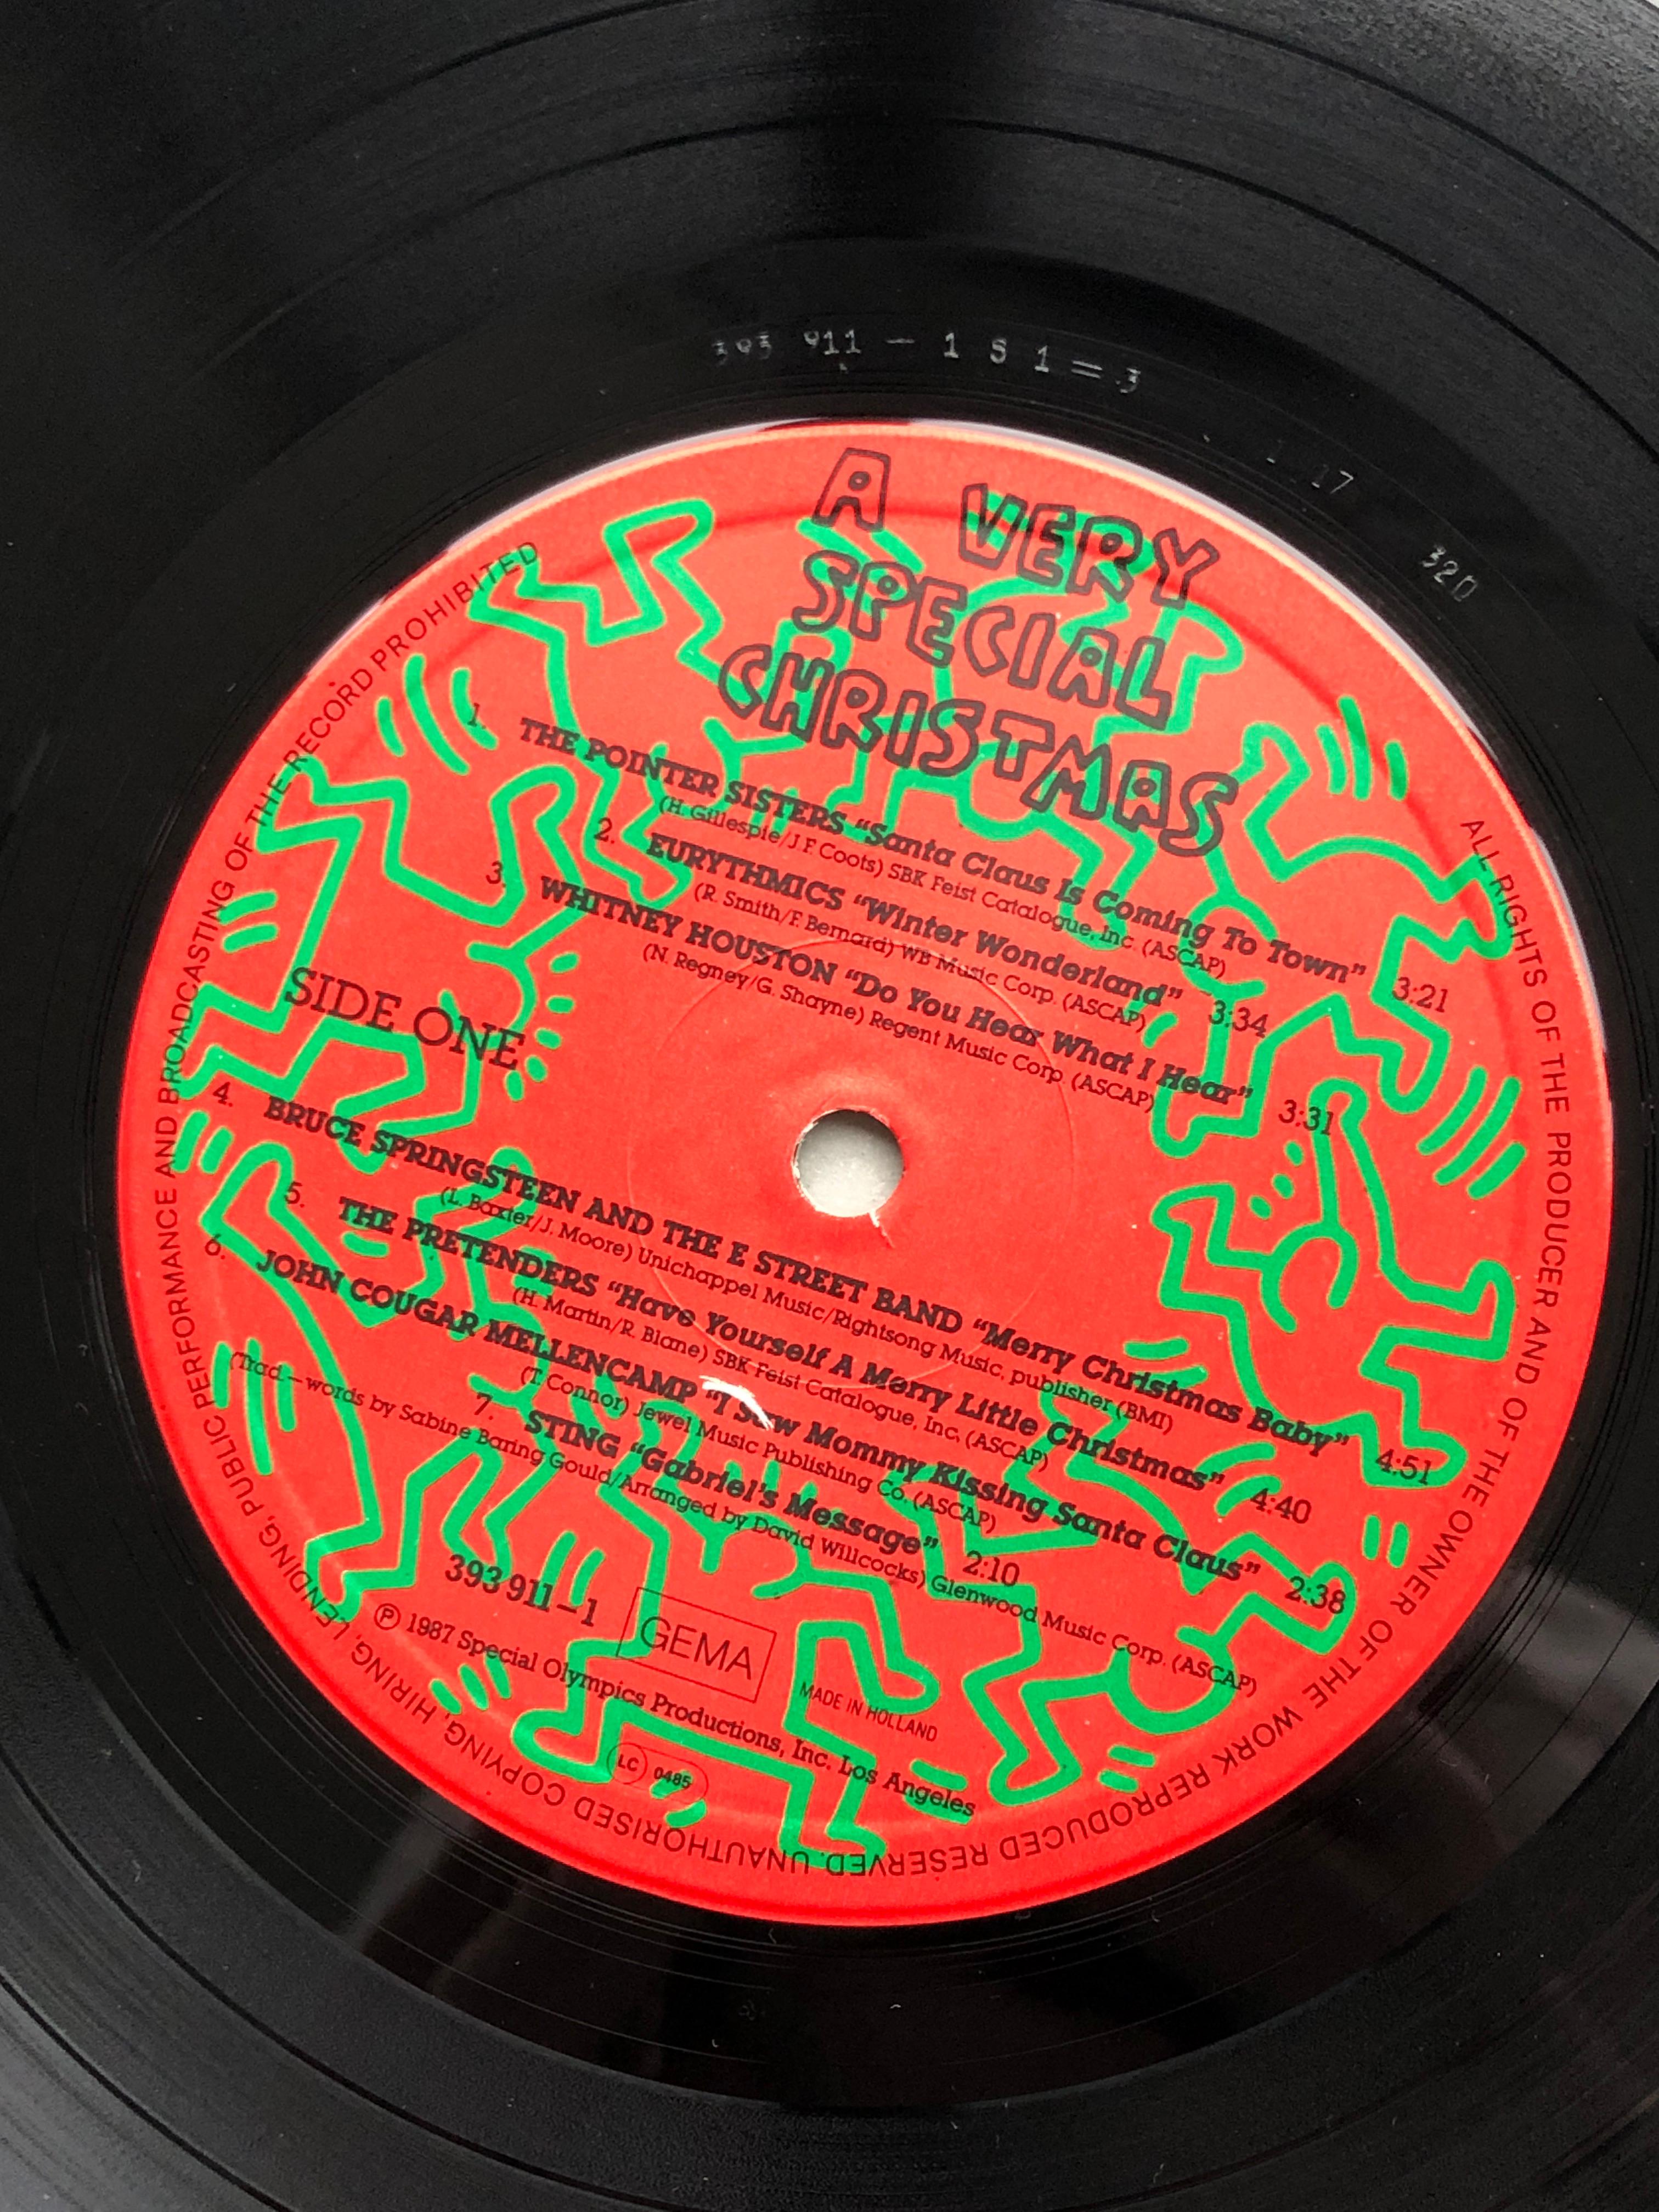 A Very Special Christmas Original 1987 first pressing Vinyl Record  For Sale 10